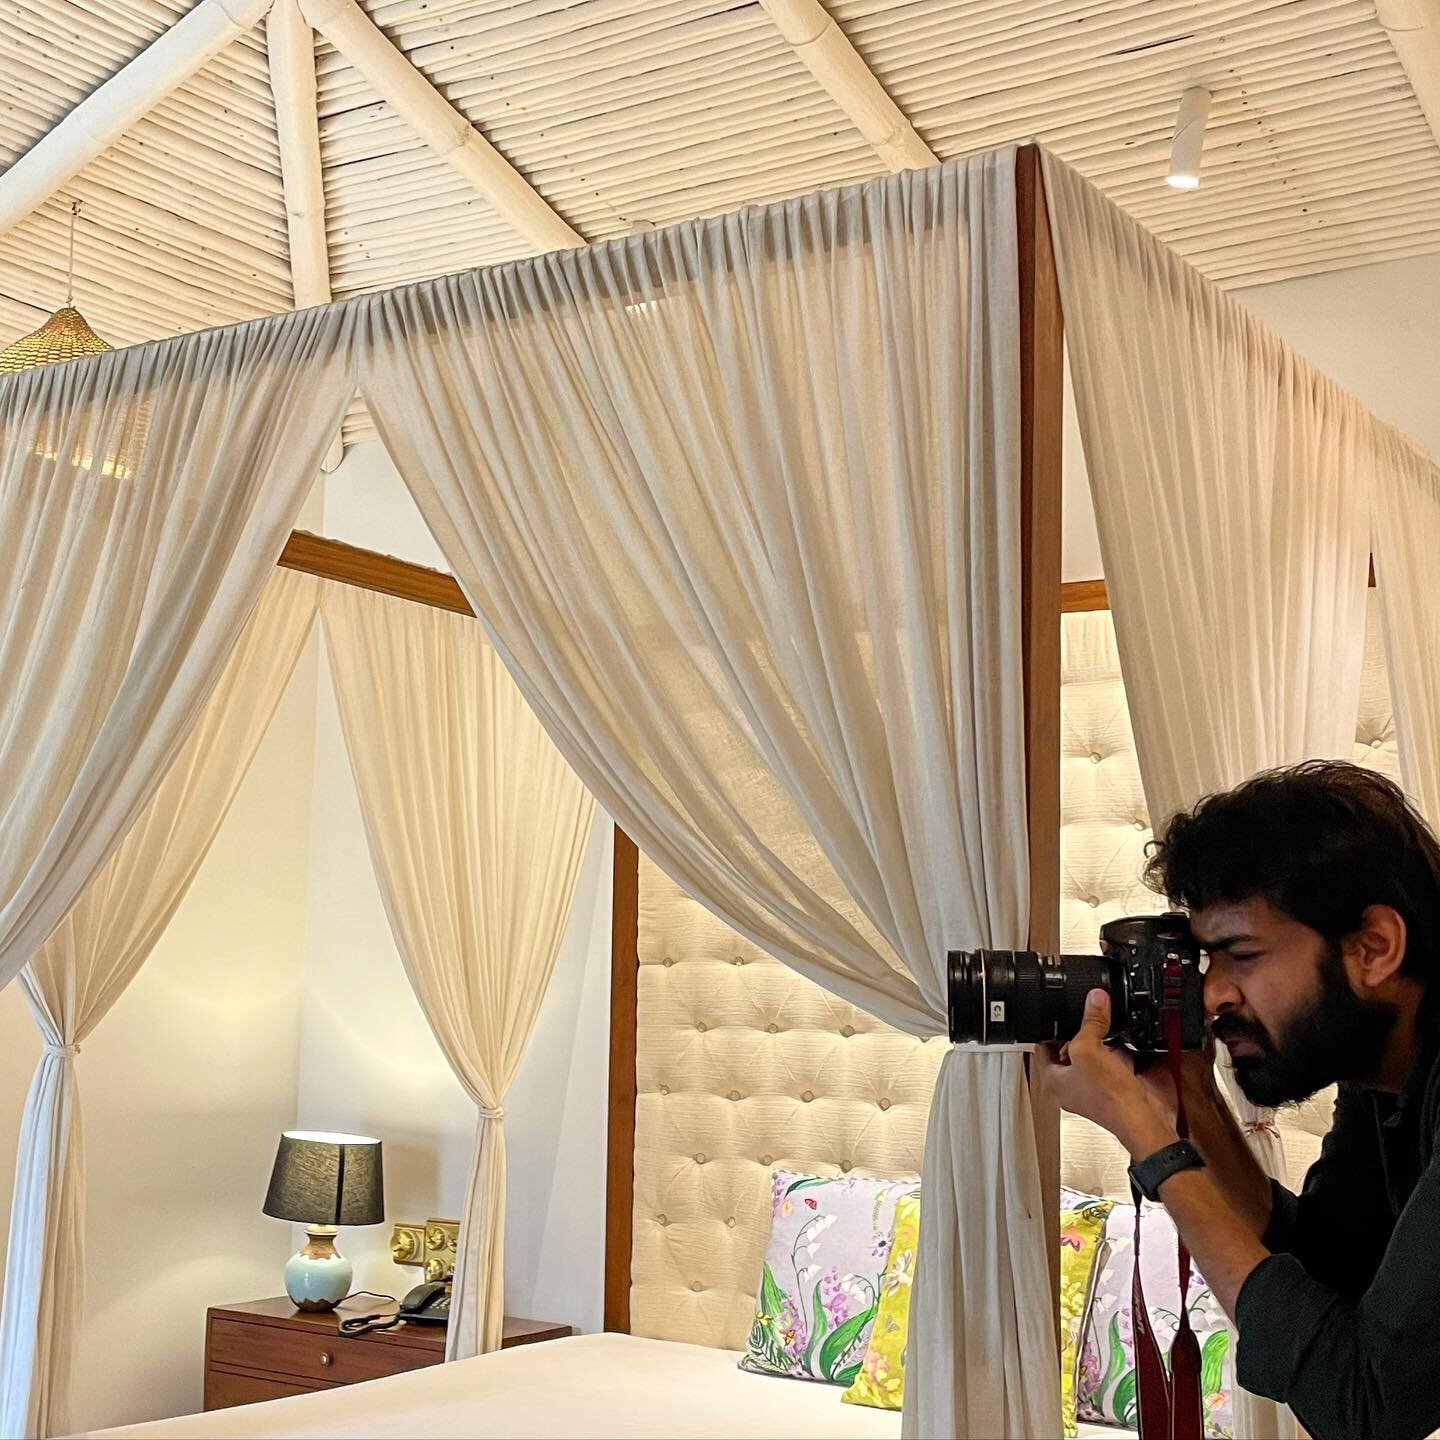 Visualising brand identity for an ambitious property client. Shooting with the very best @alimonisnaqvi in his home hood Goa. 

#photoshoot #stereoassociates #stereoindia #photographer #branding #secondhomes #goa #incredibleindia #visualidentityprodu